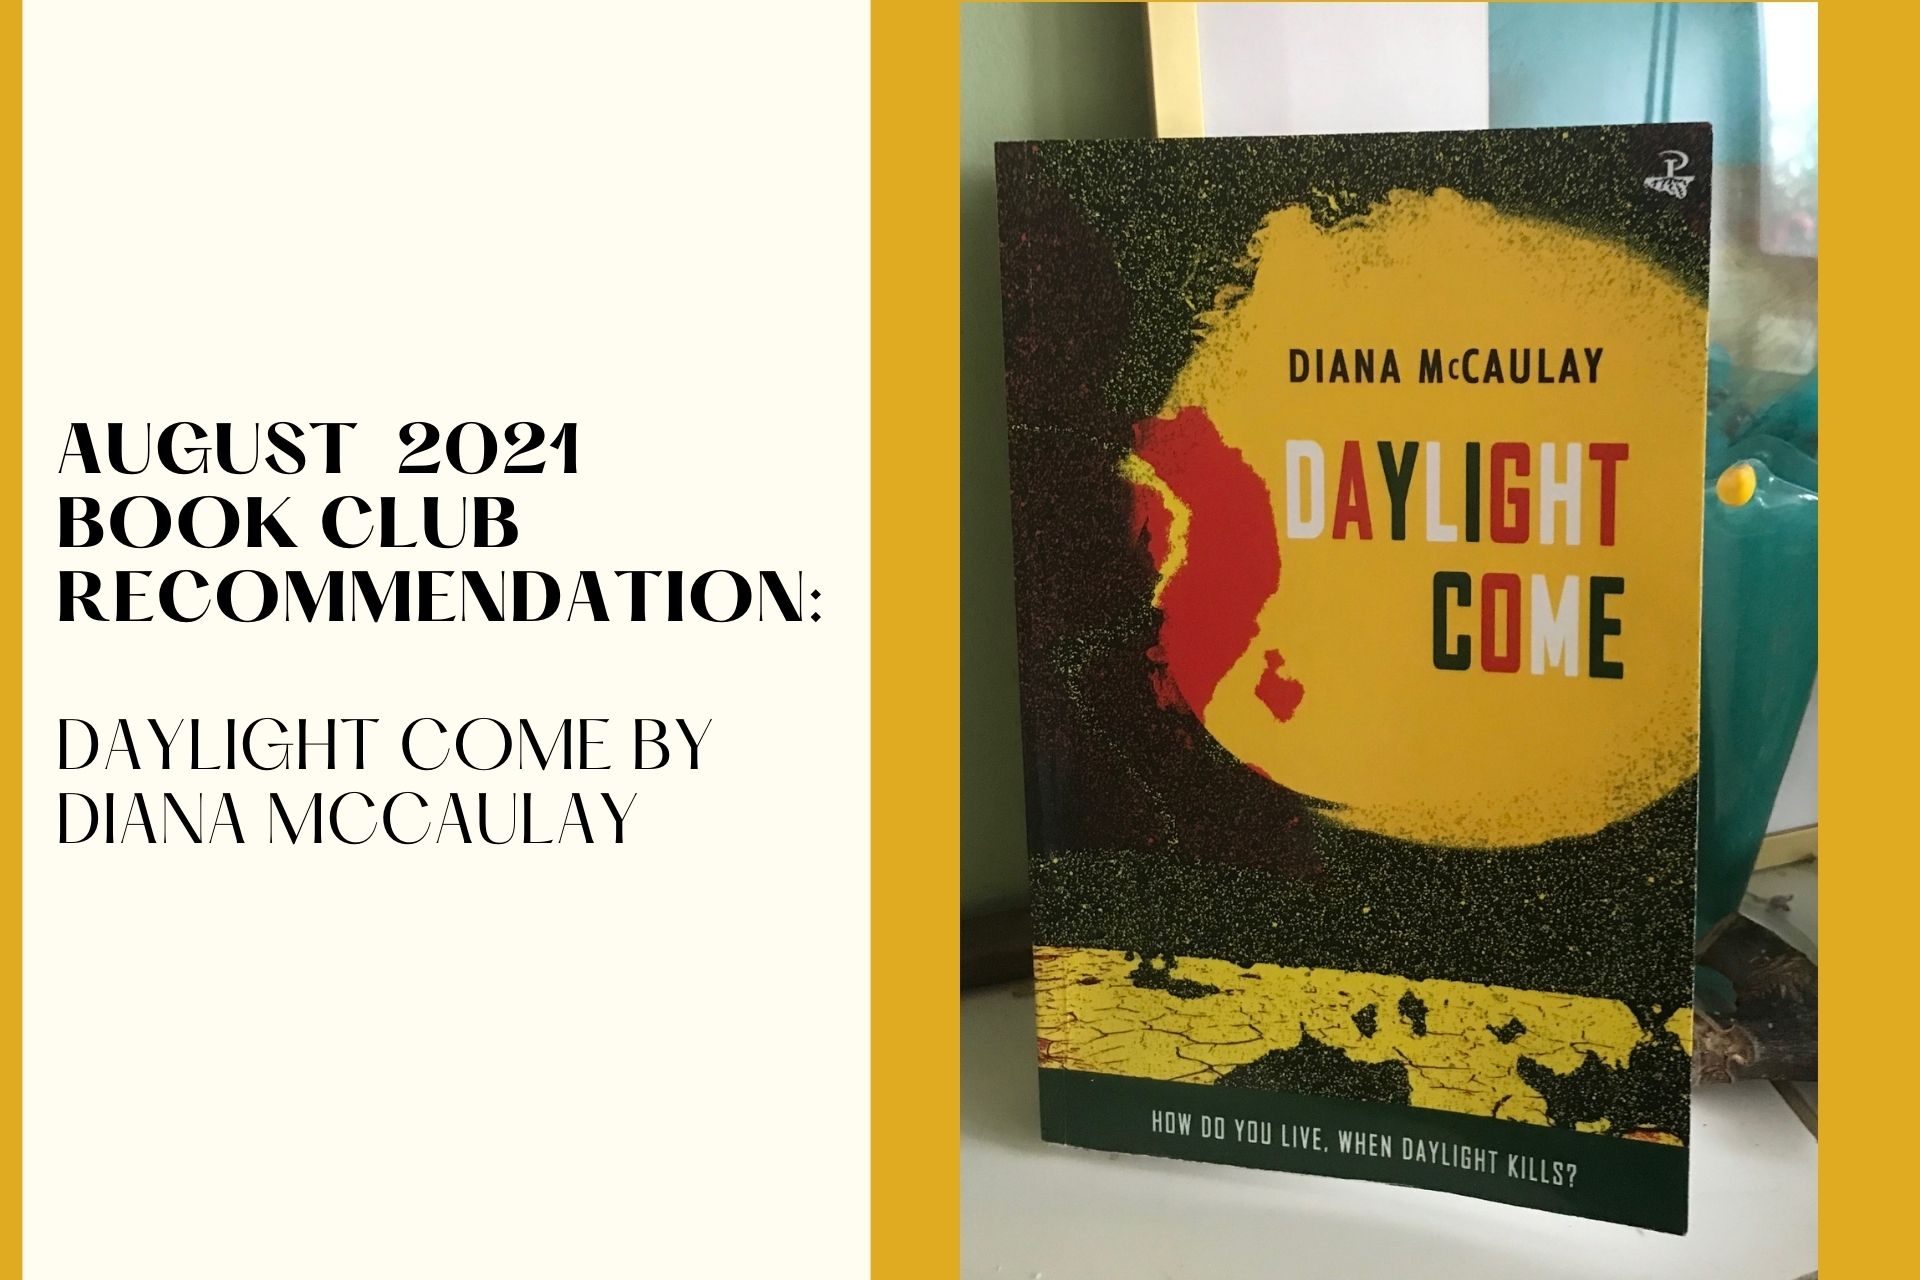 August 2021 Book Club Recommendation: Daylight Come by Diana McCaulay